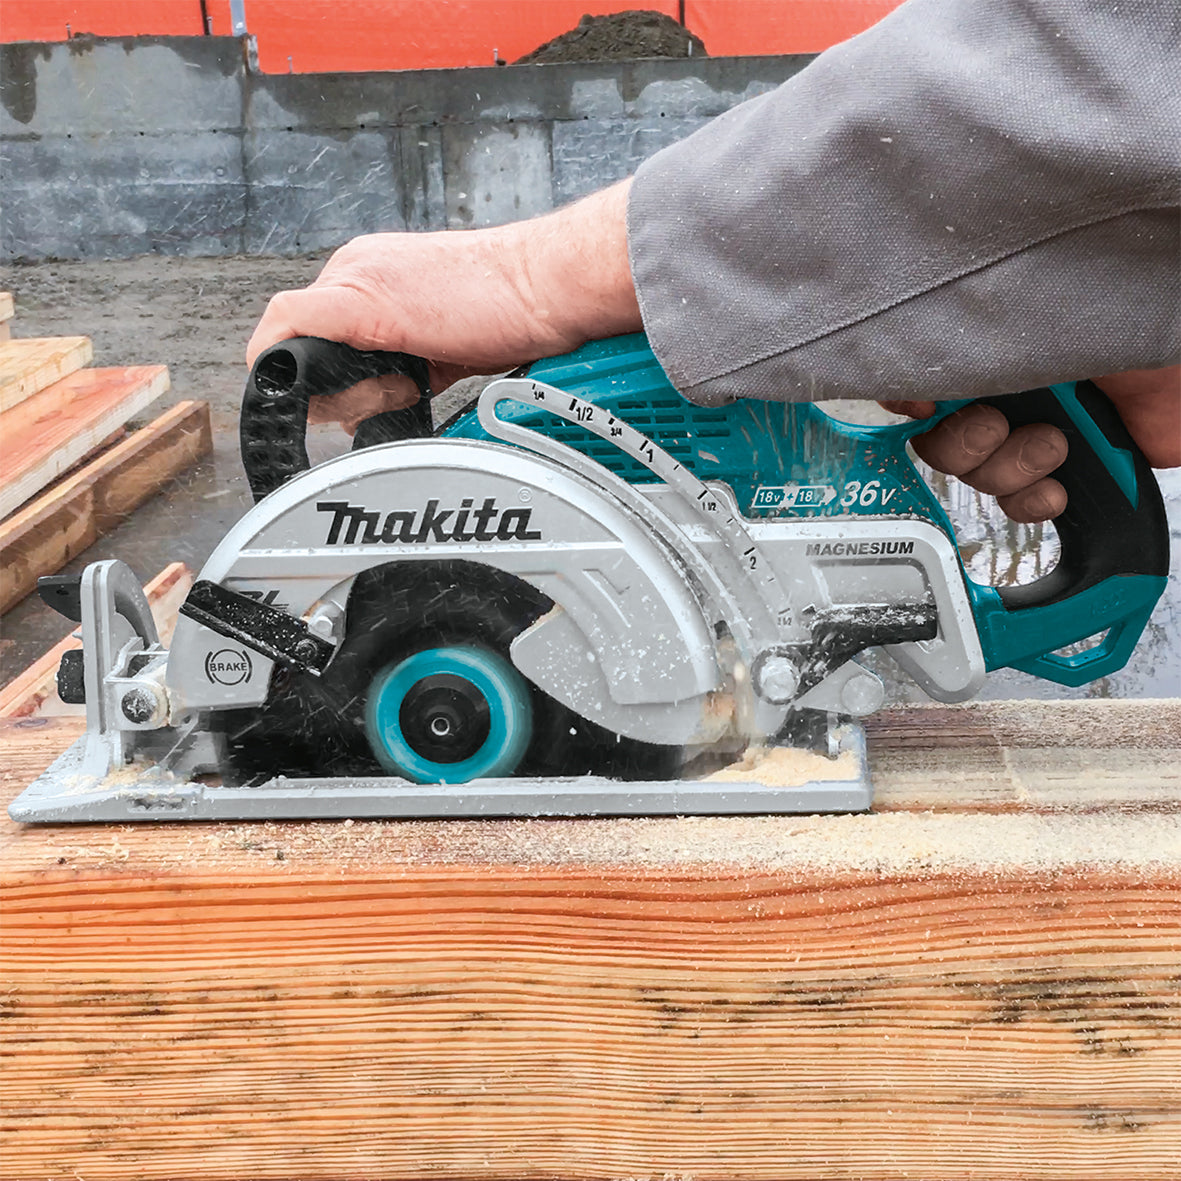 36V (18Vx2) 185mm Brushless Rear Handle Saw Bare (Tool Only) DRS780Z by Makita